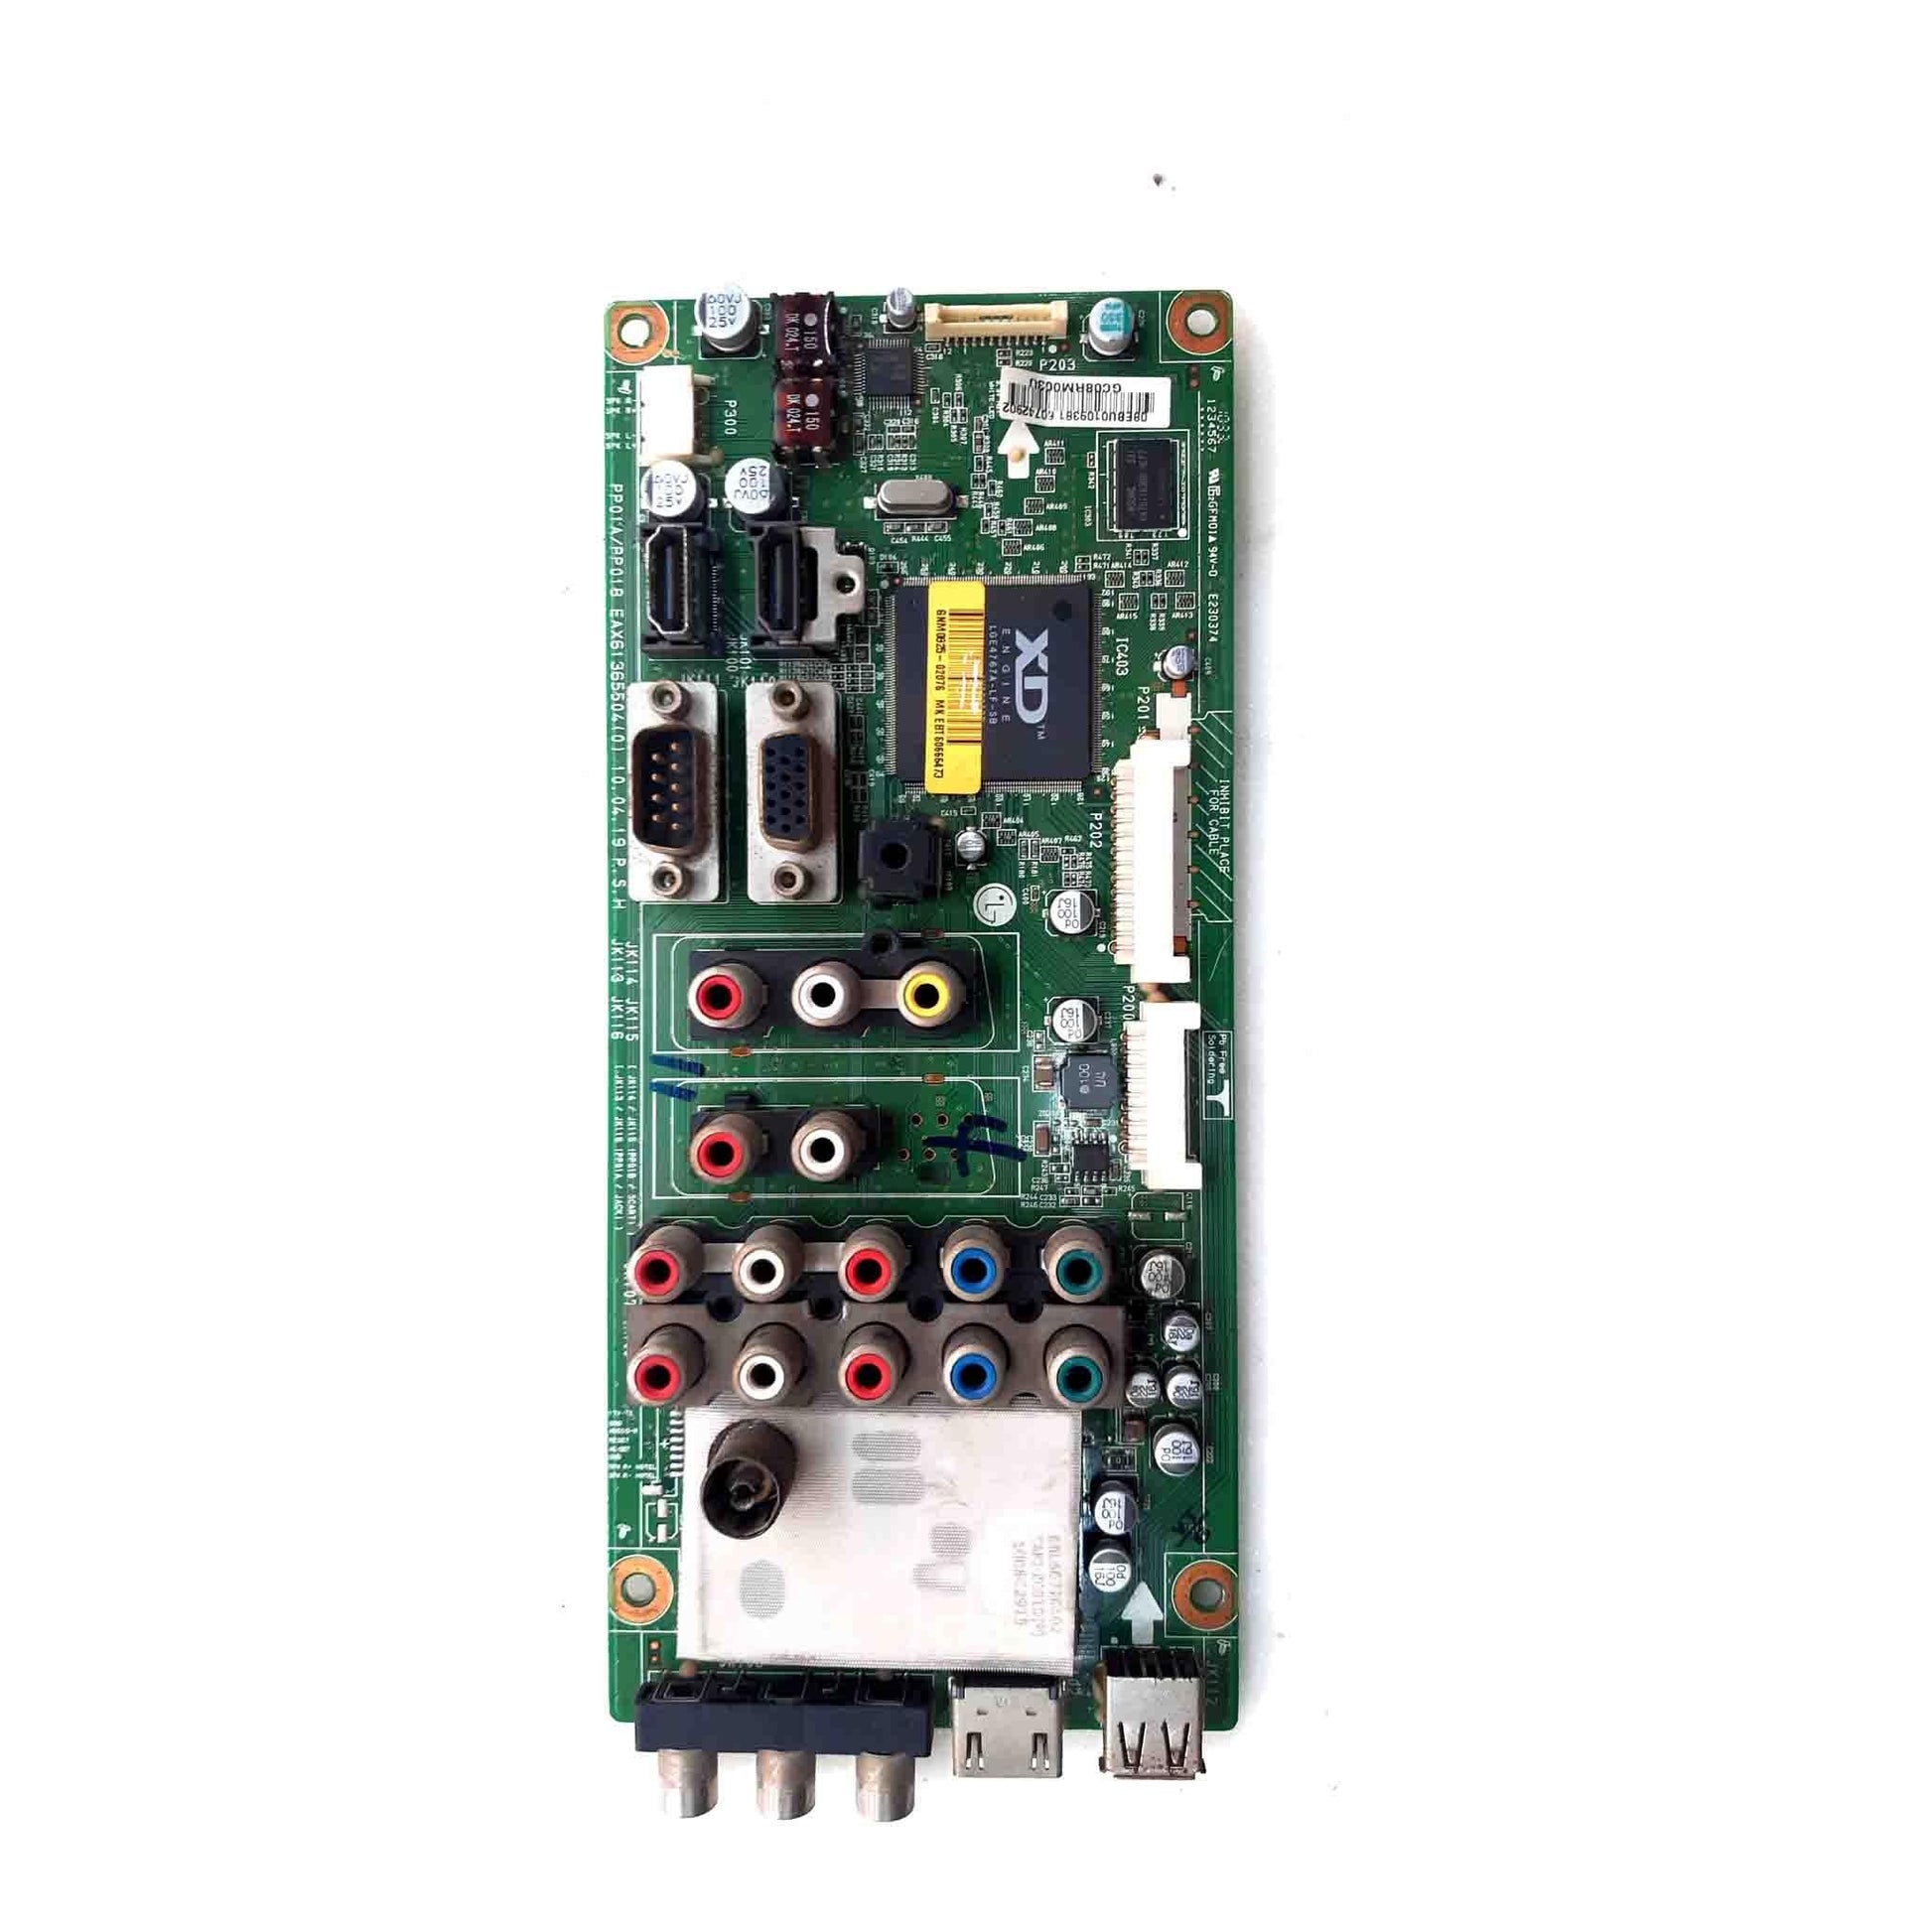 Mother board Suitable for 42PJ350 LG LED TV - Faritha